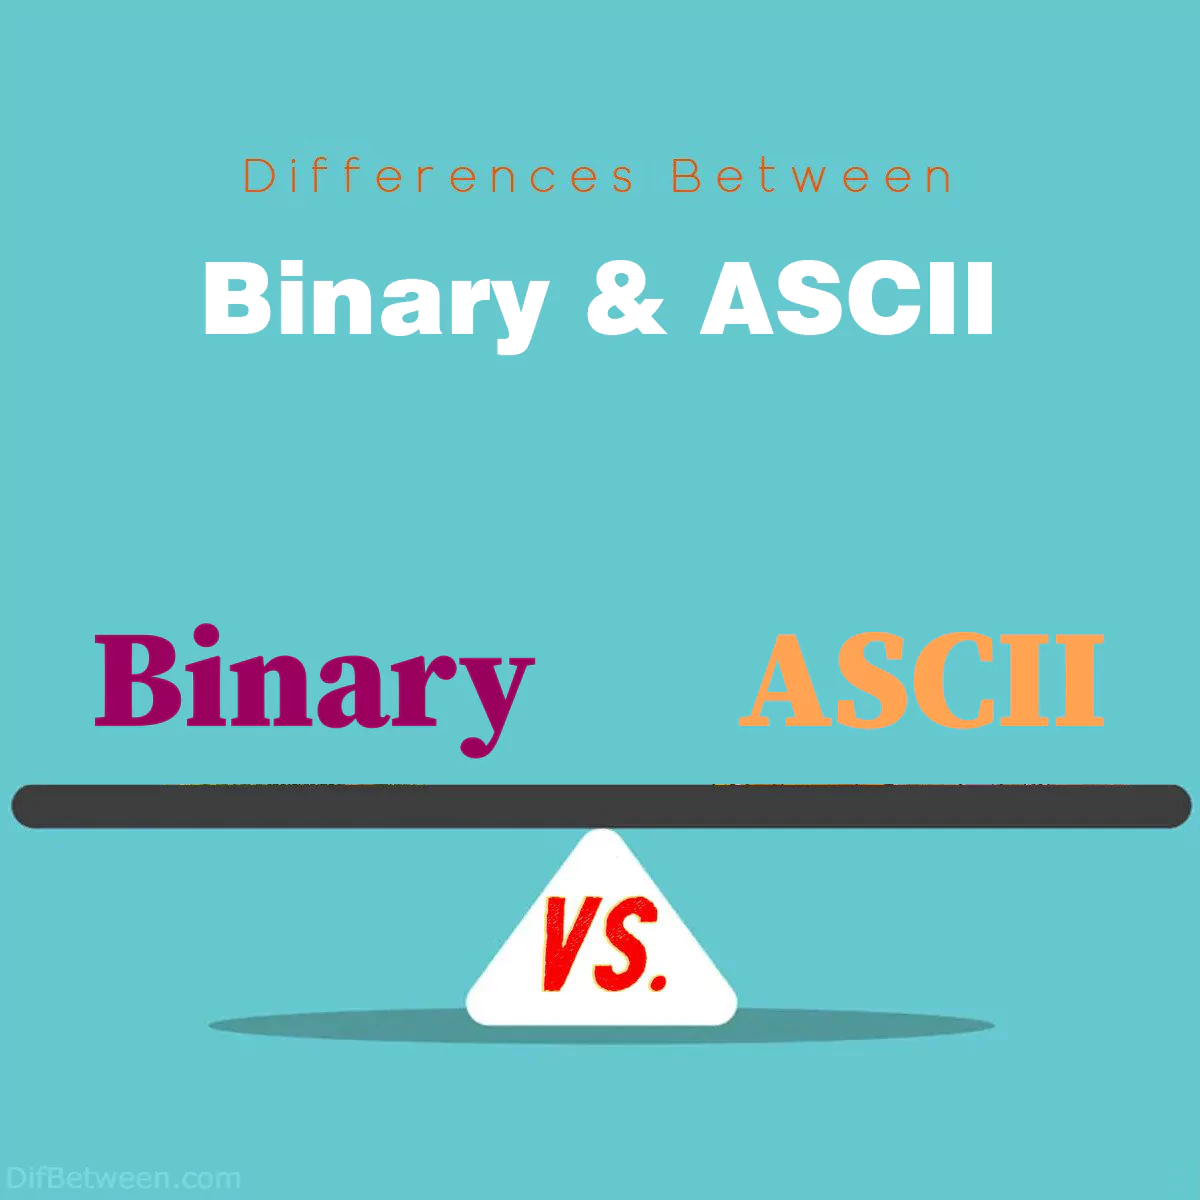 Differences Between Binary and ASCII